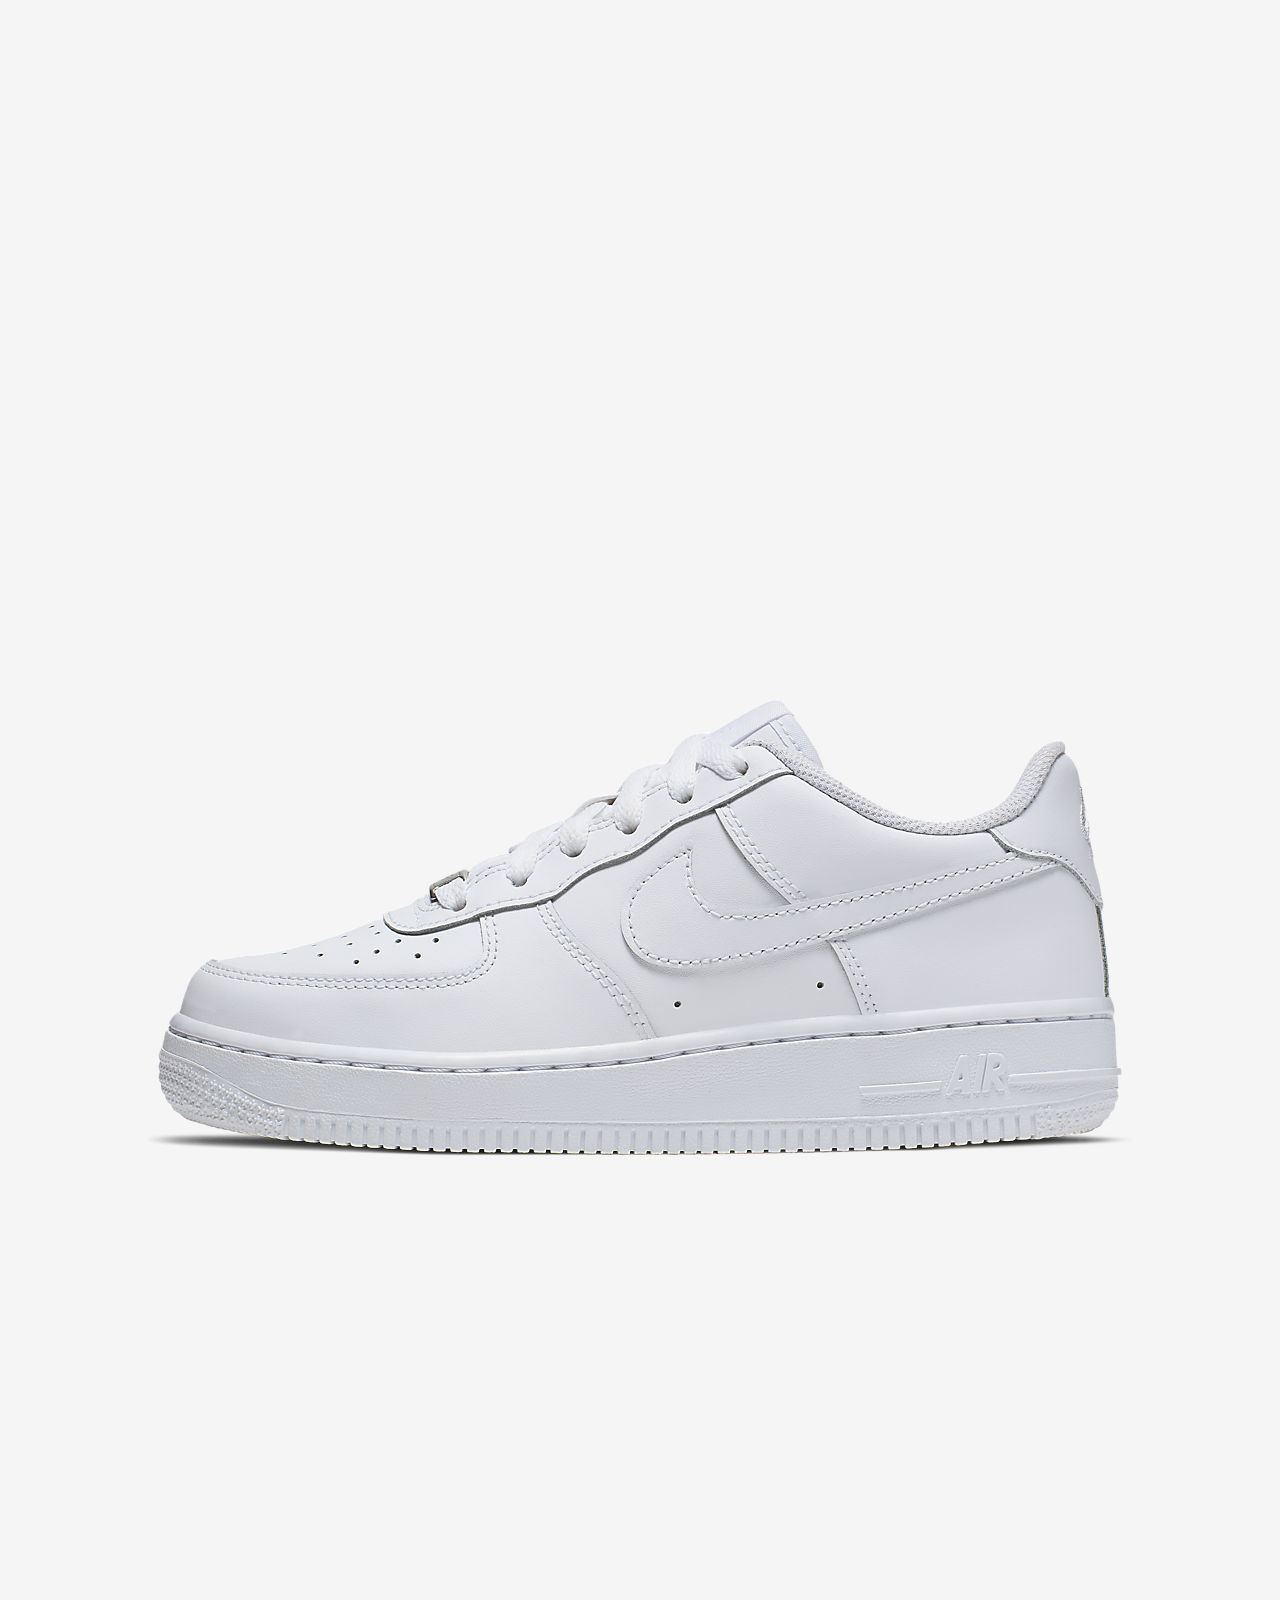 how much are air force 1